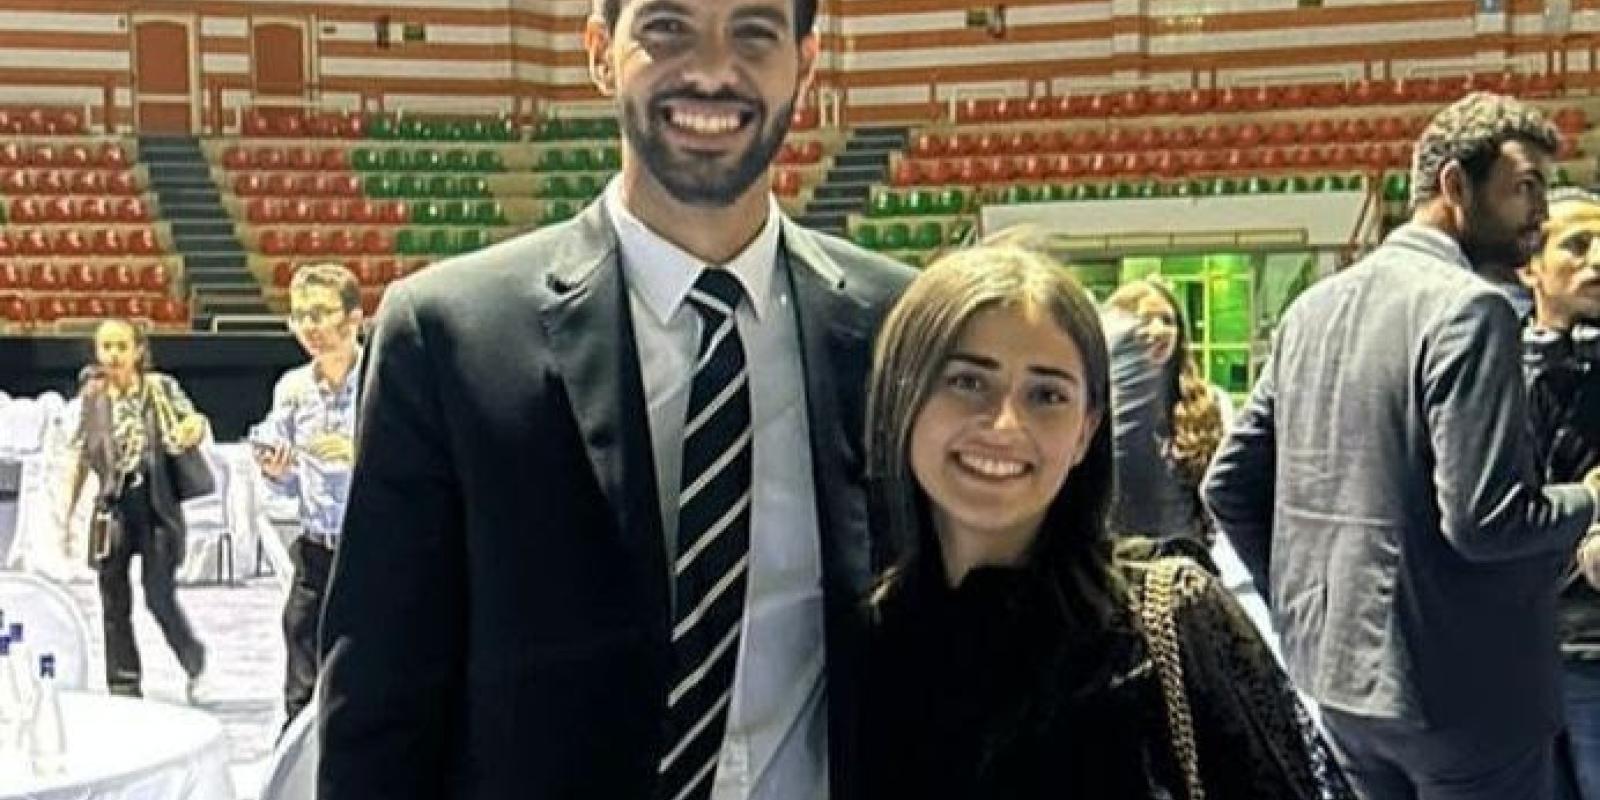 A male and female students standing and smiling